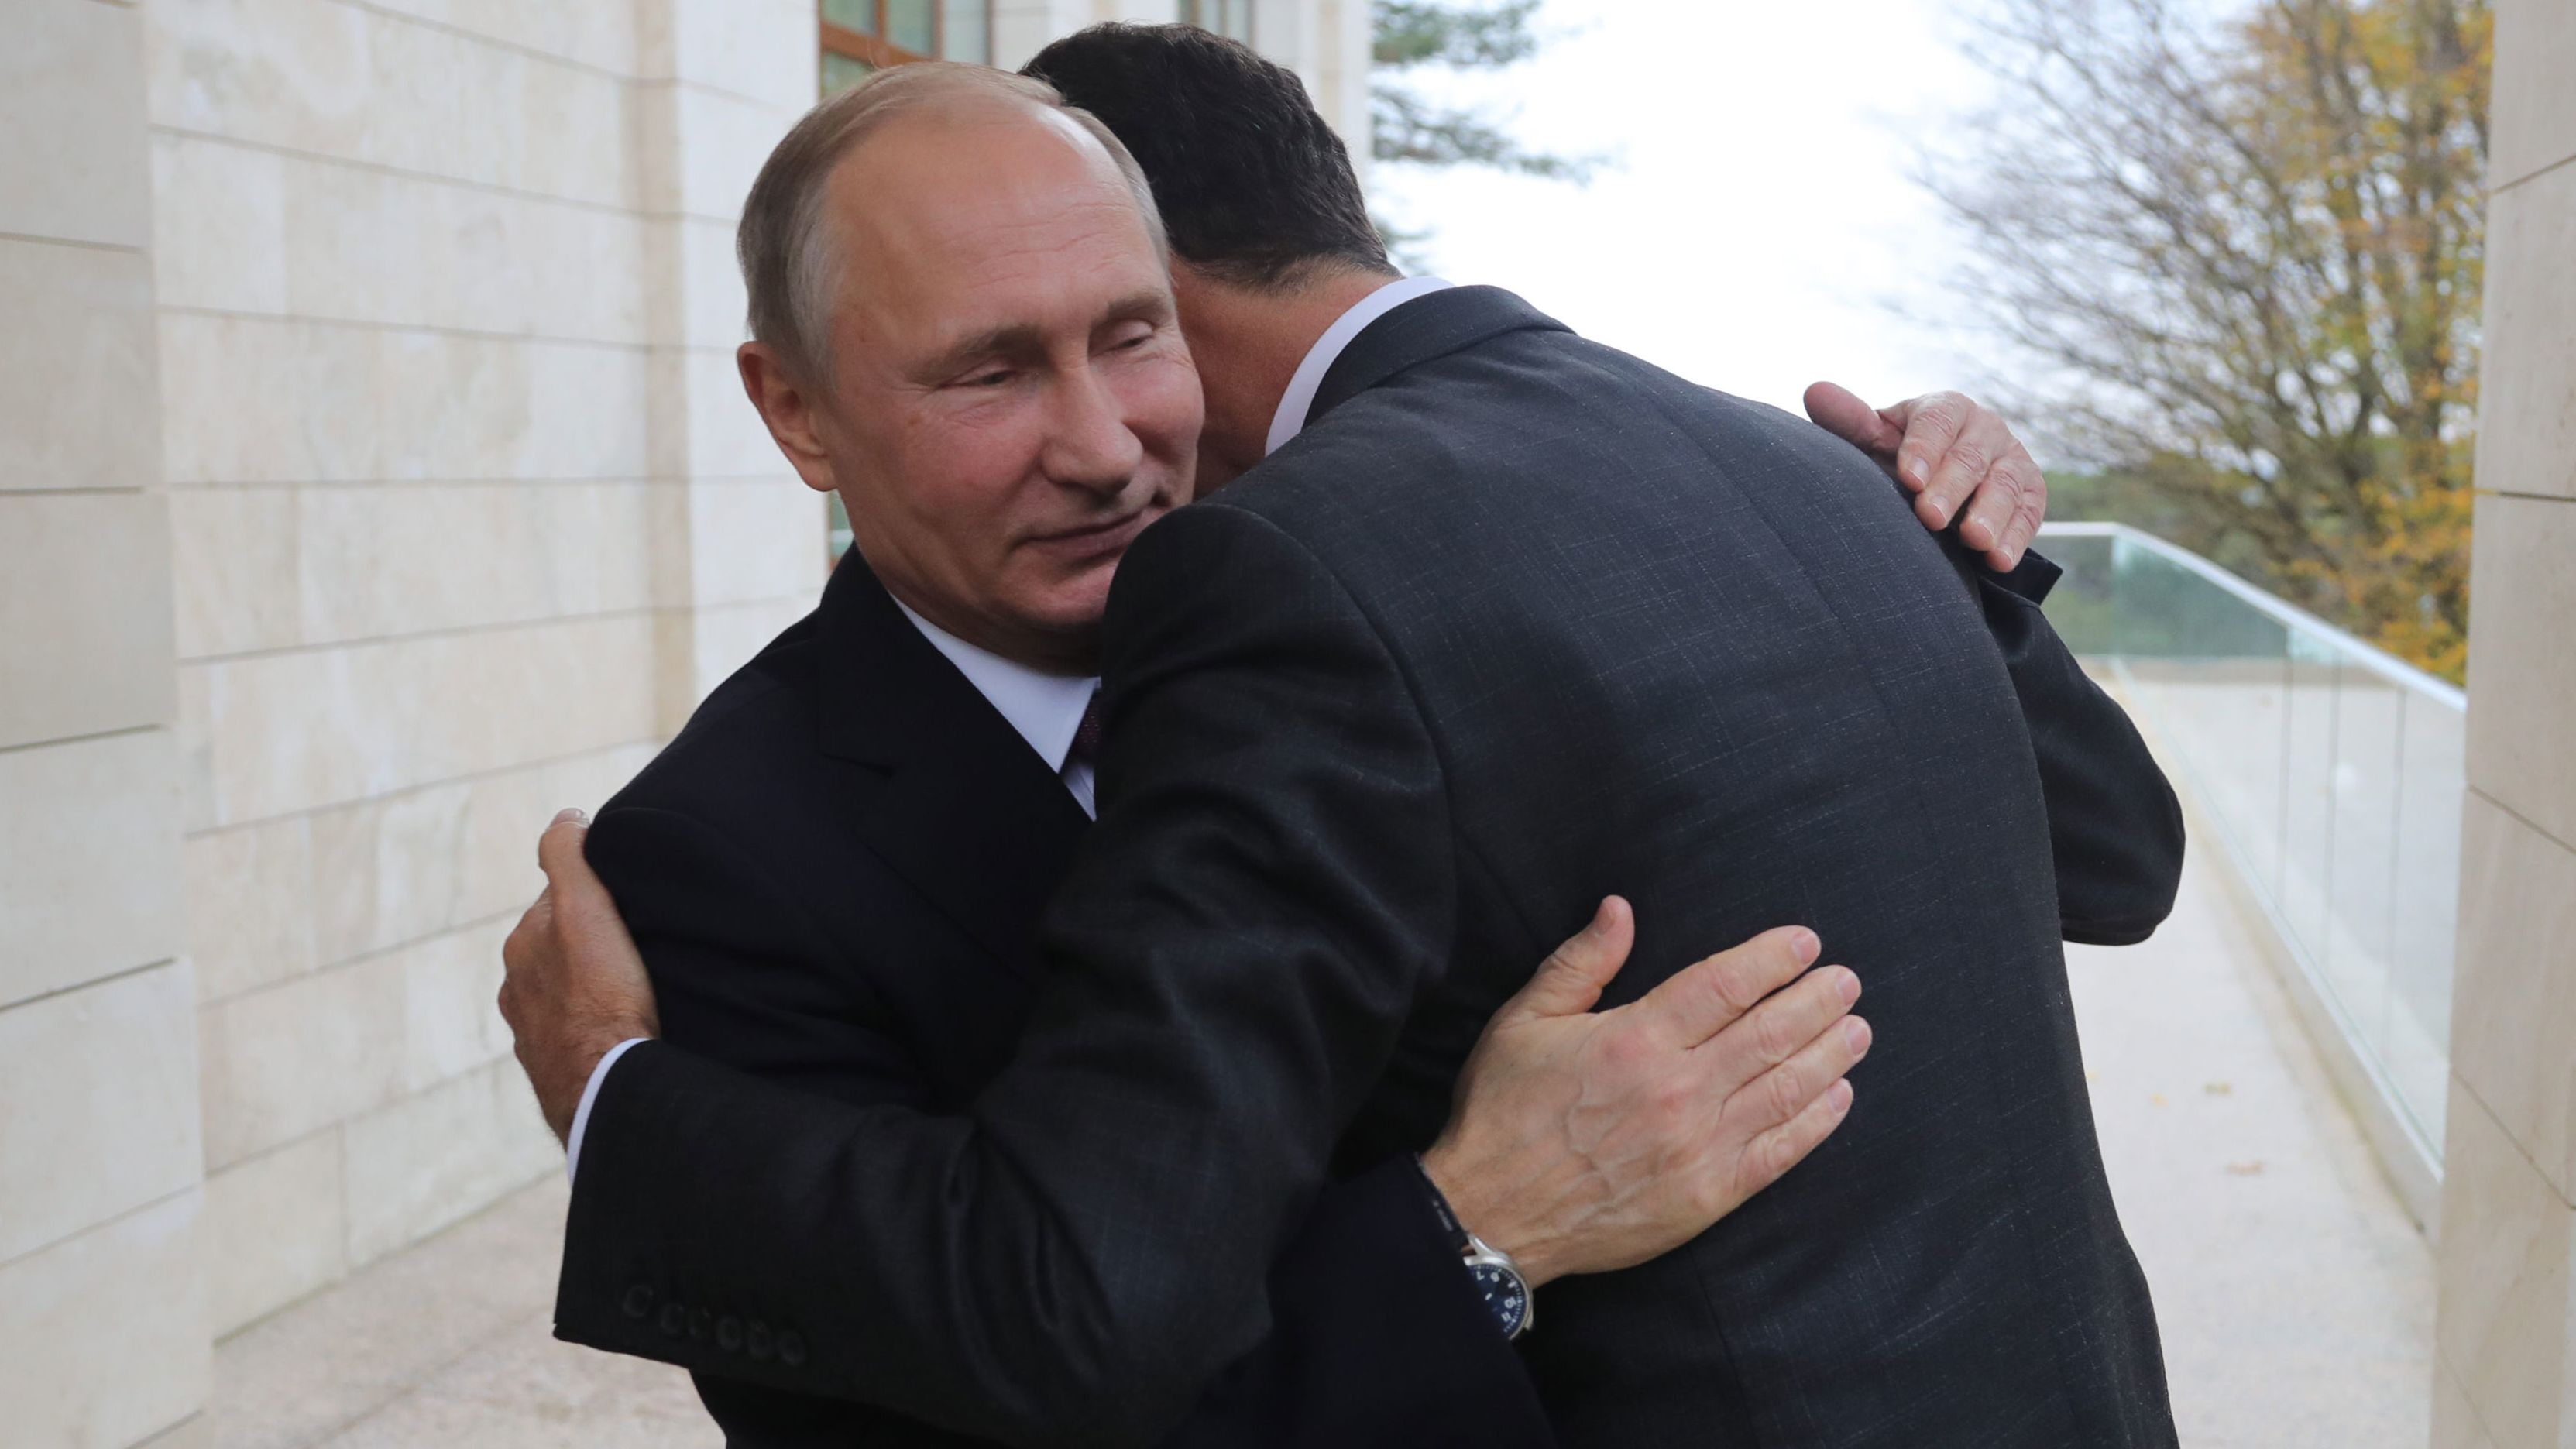 Putin (L) embraces Assad during their meeting in Sochi last month.  